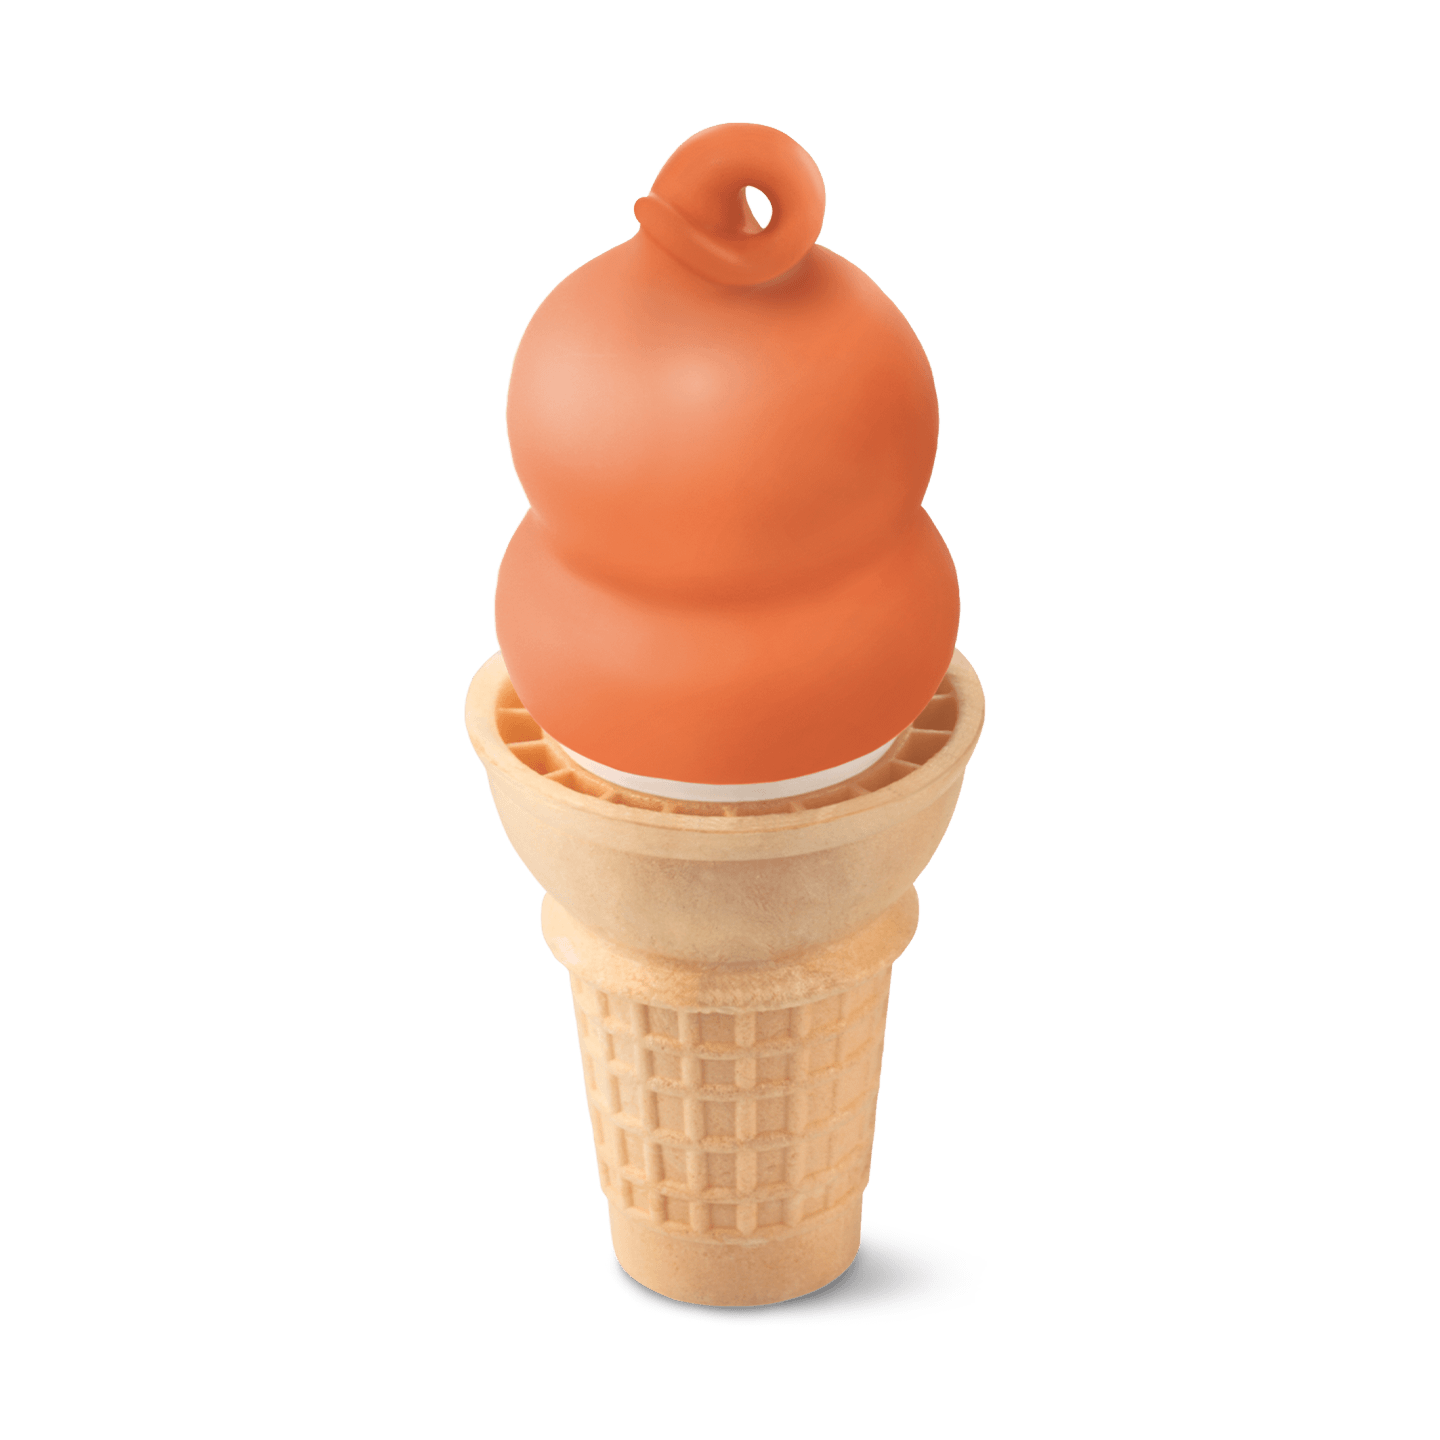 Dairy Queen Large Dreamsicle Dipped Ice Cream Cone Nutrition Facts